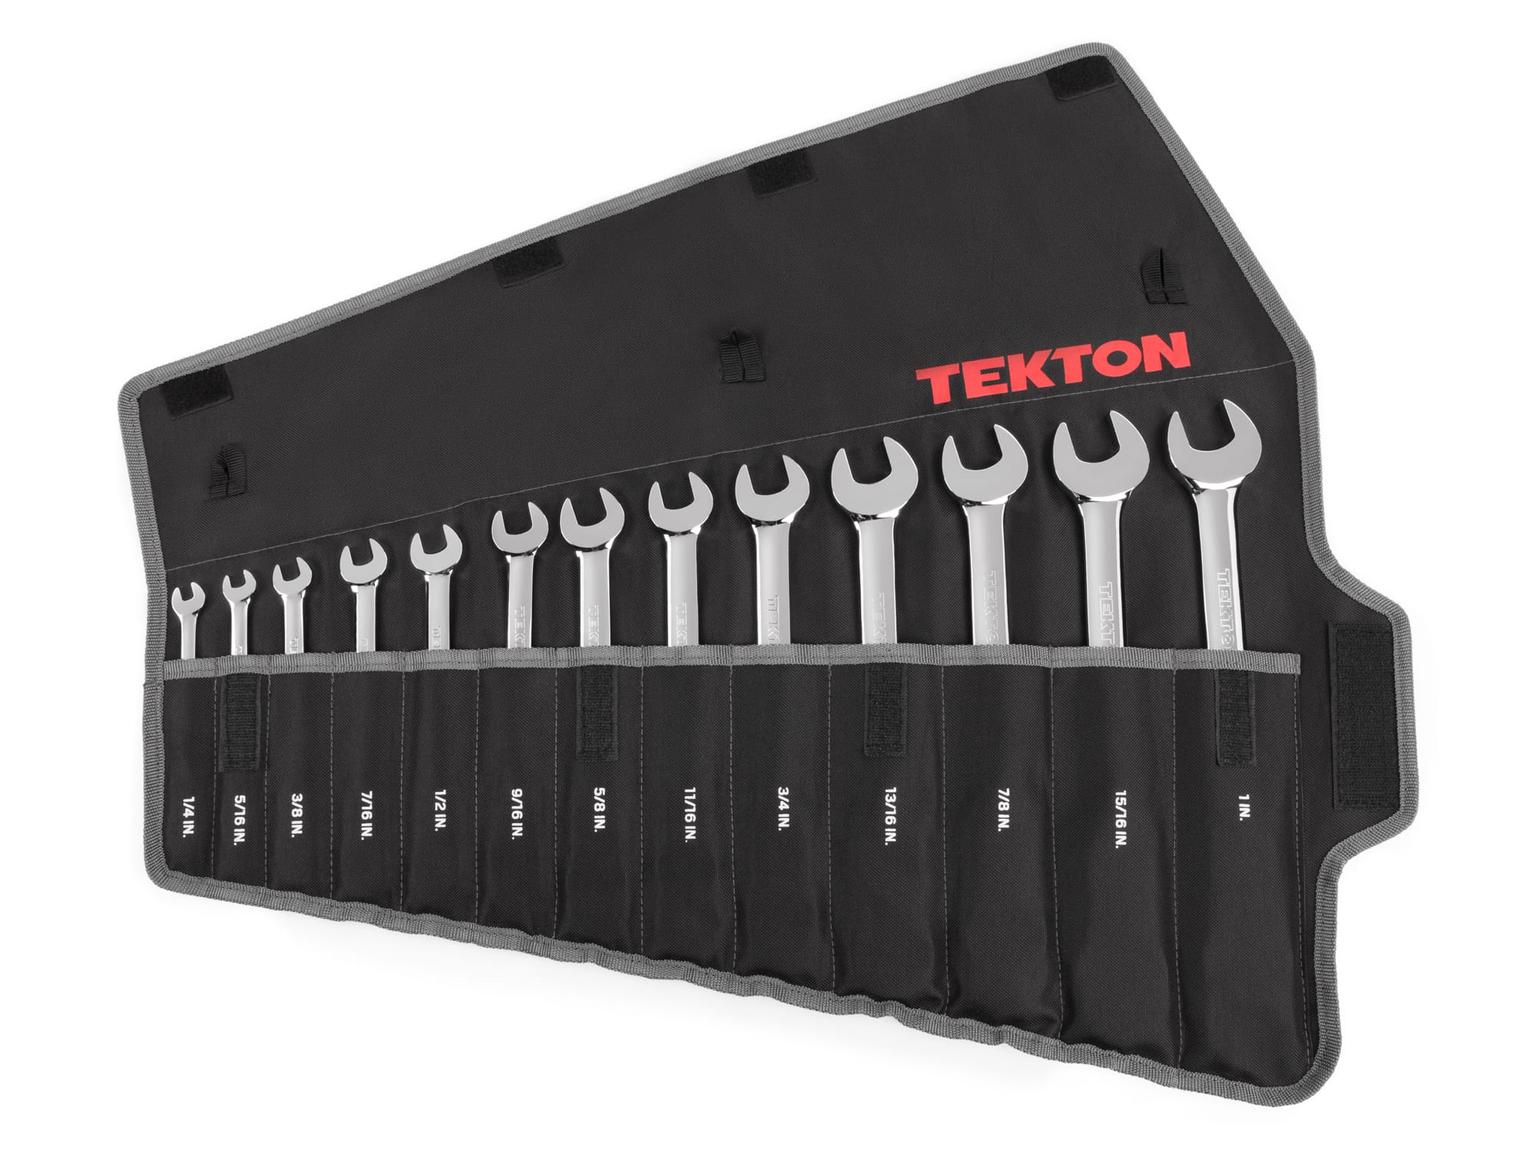 TEKTON WRN57091-T Flex Ratcheting Combination Wrench Set with Pouch, 13-Piece (1/4-1 in.)